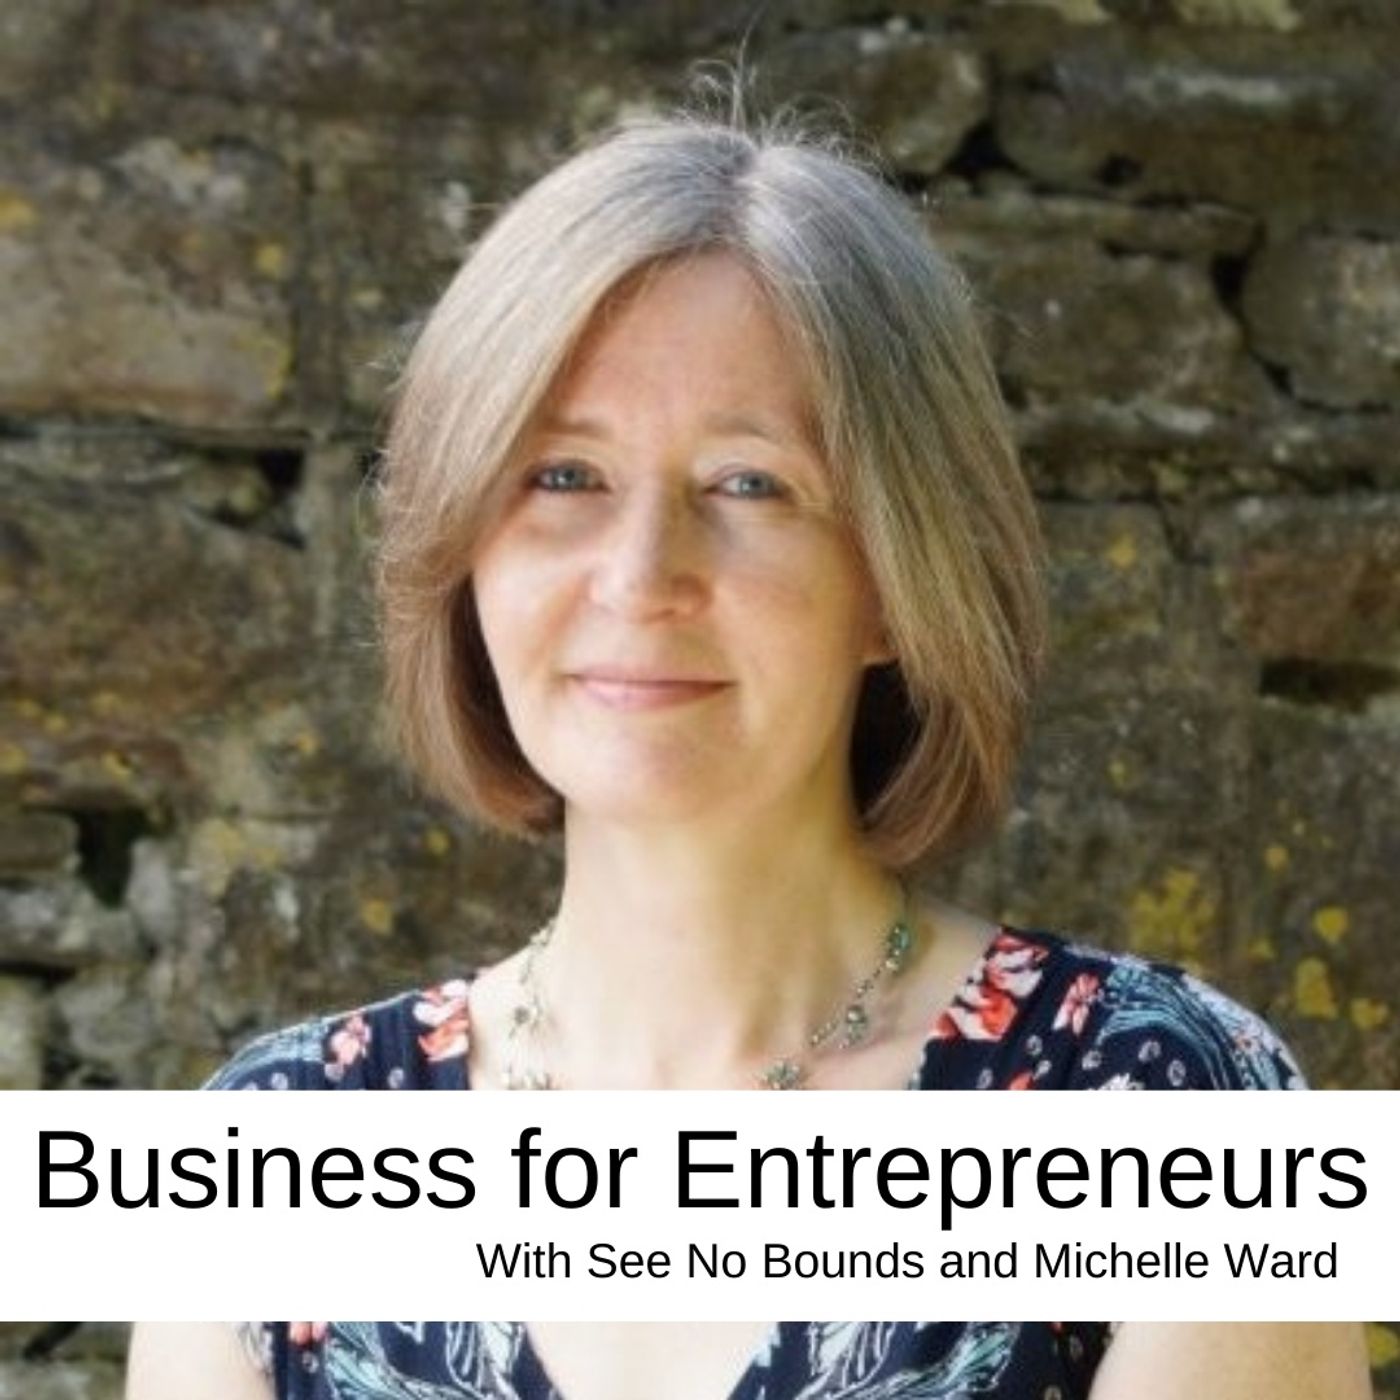 Business for Entrepreneurs with Michelle Ward